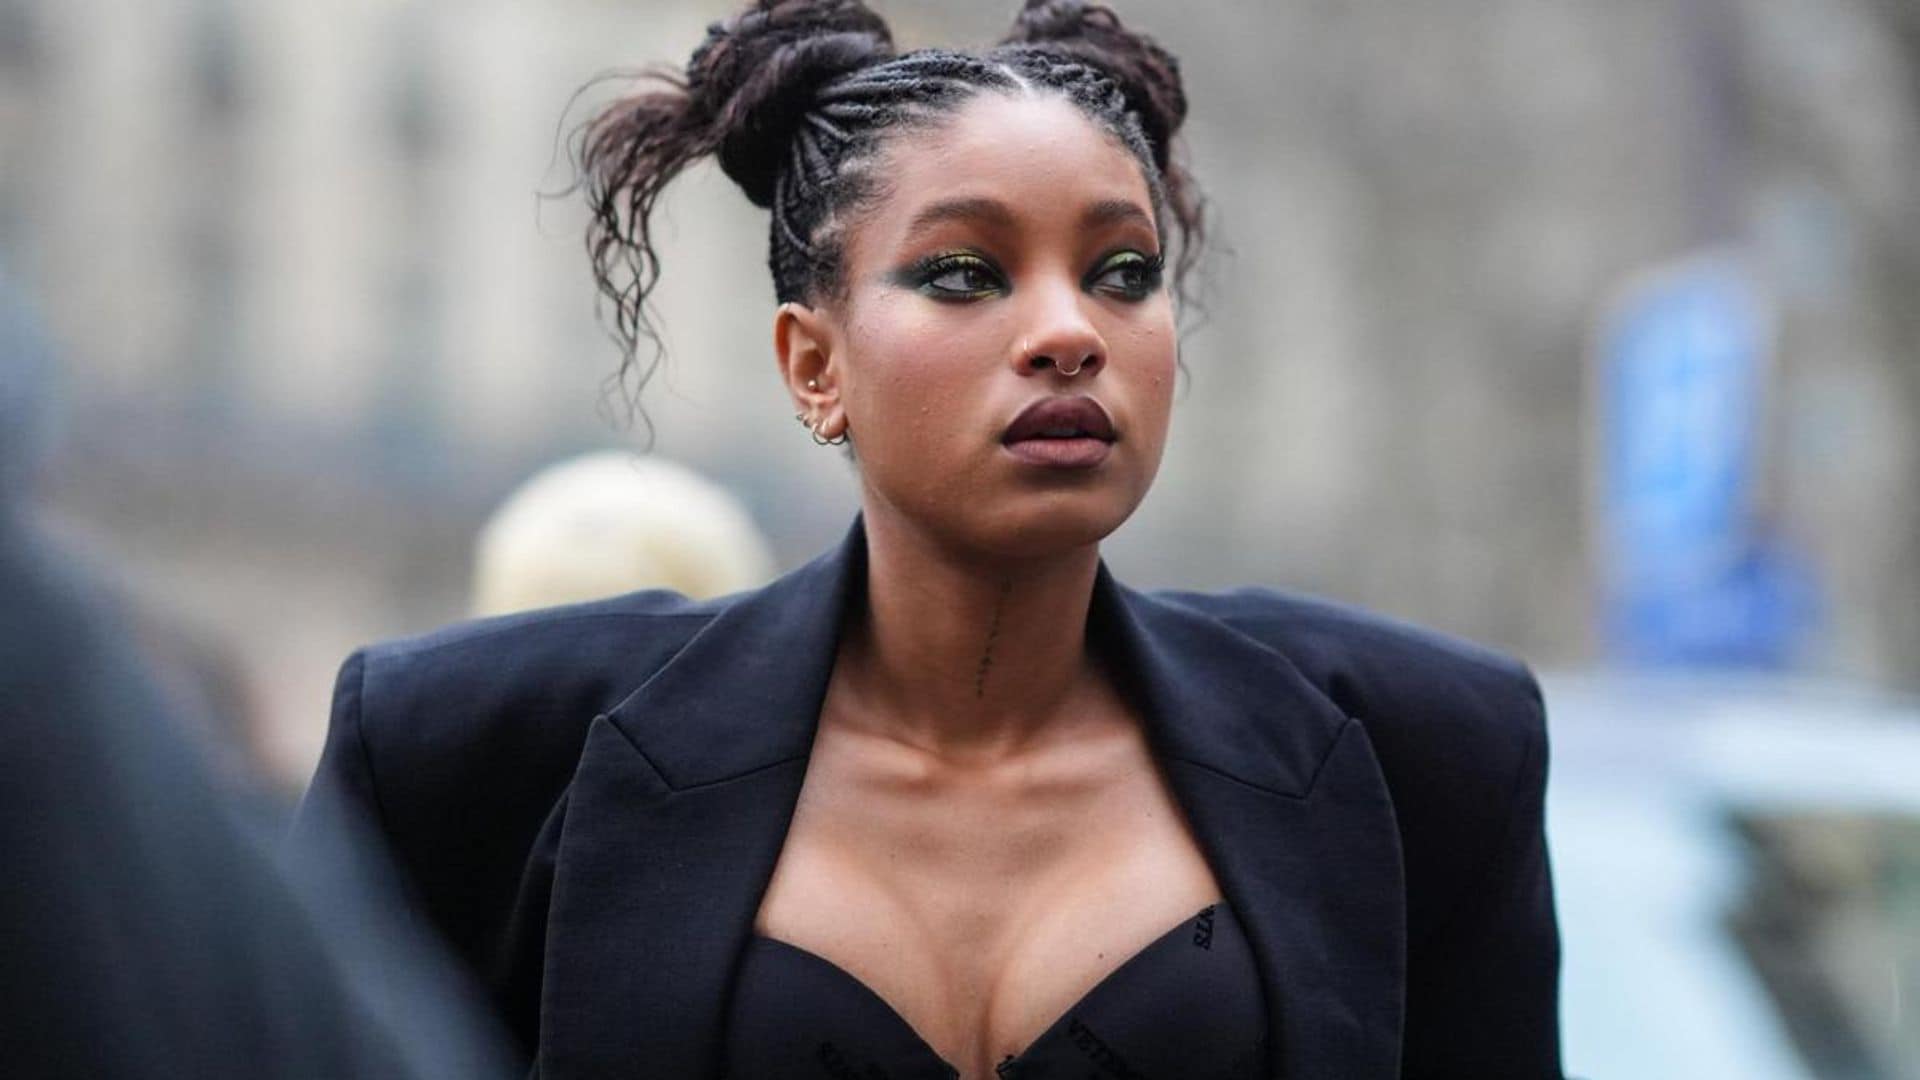 Willow Smith shows off her hand tattoos: What is the meaning behind them?